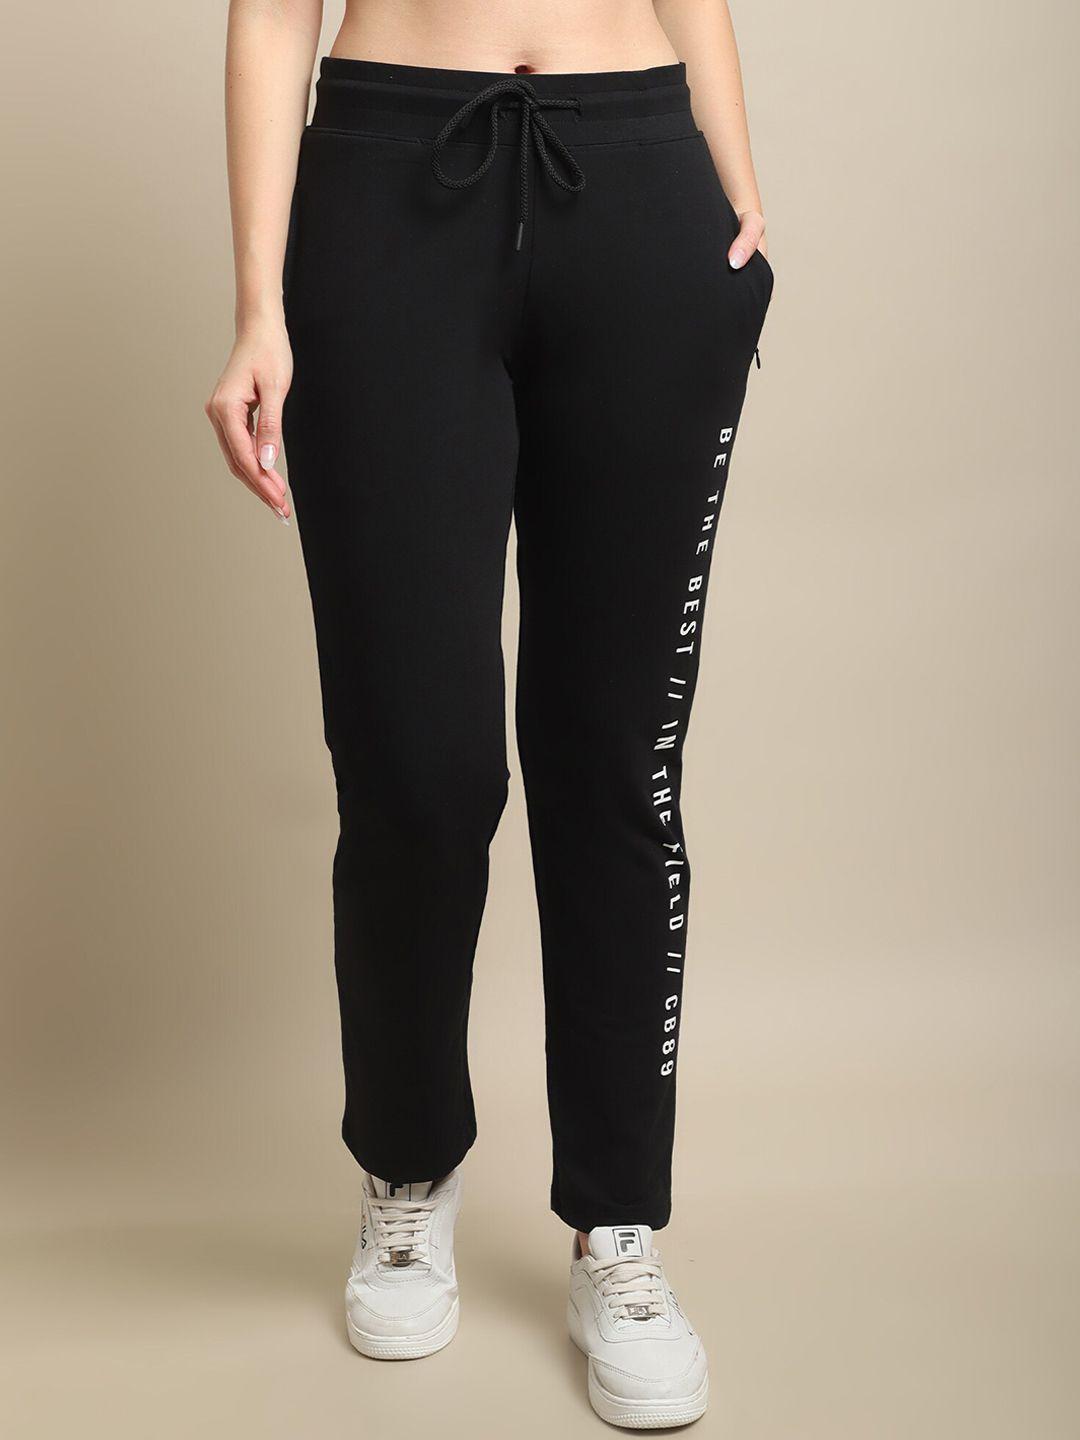 cantabil-women-typography-printed-cotton-track-pants